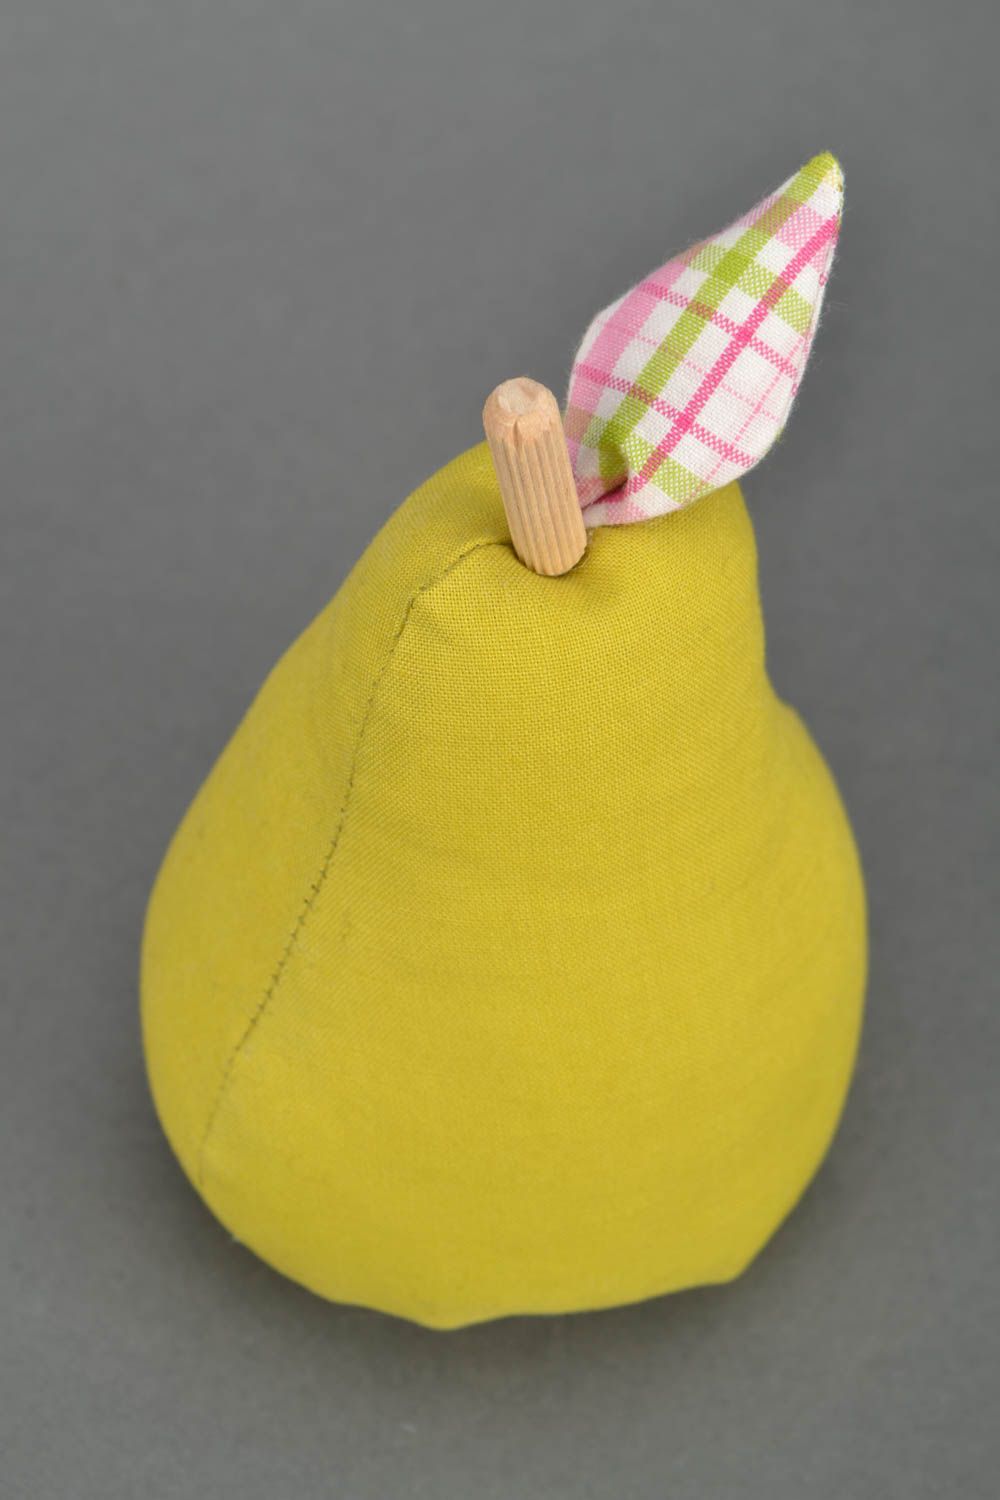 Homemade soft toy Pear photo 4